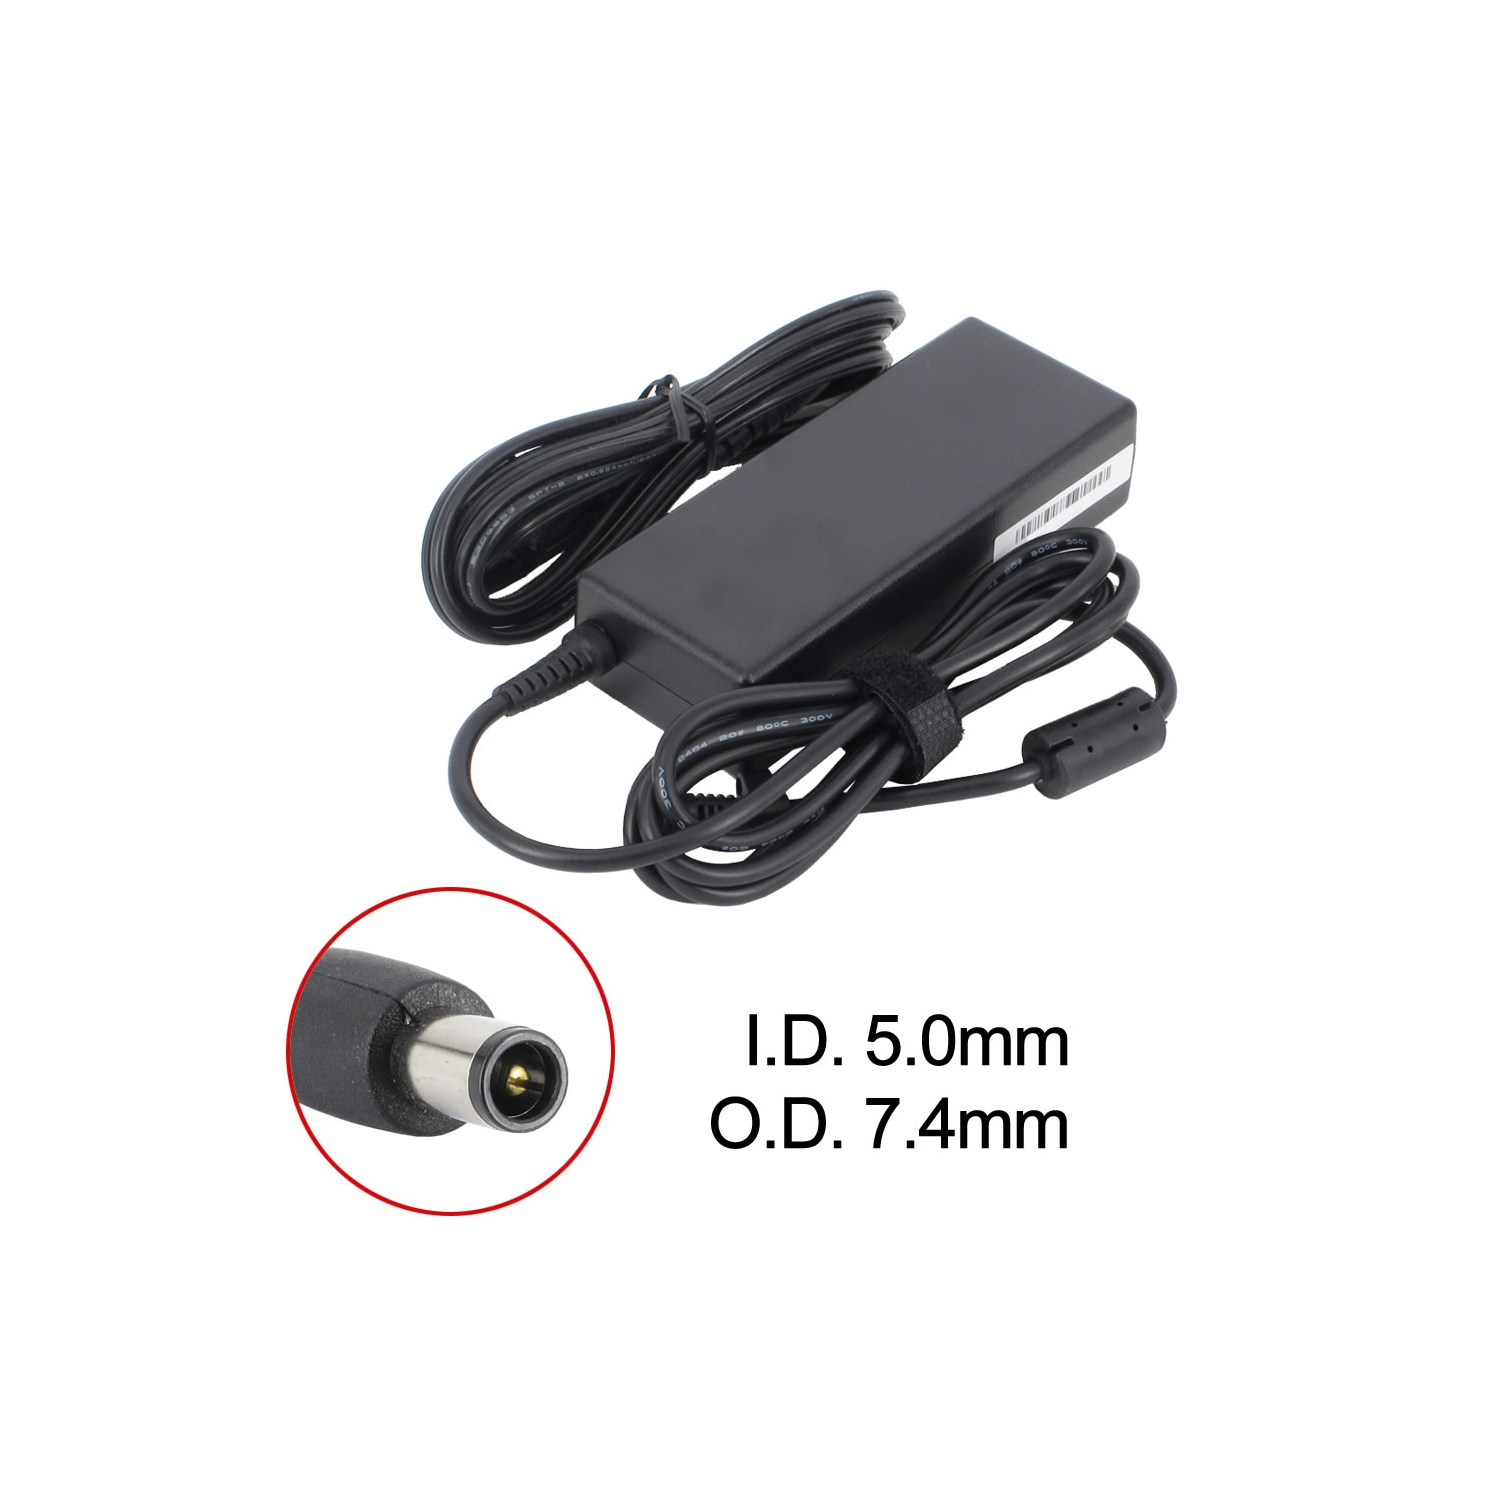 New Laptop AC Adapter for Dell Inspiron 15 3000, 0C120H, 310-7441, 310-9438, 332-1831, CF989, FA90PM136, NF599, TR82J